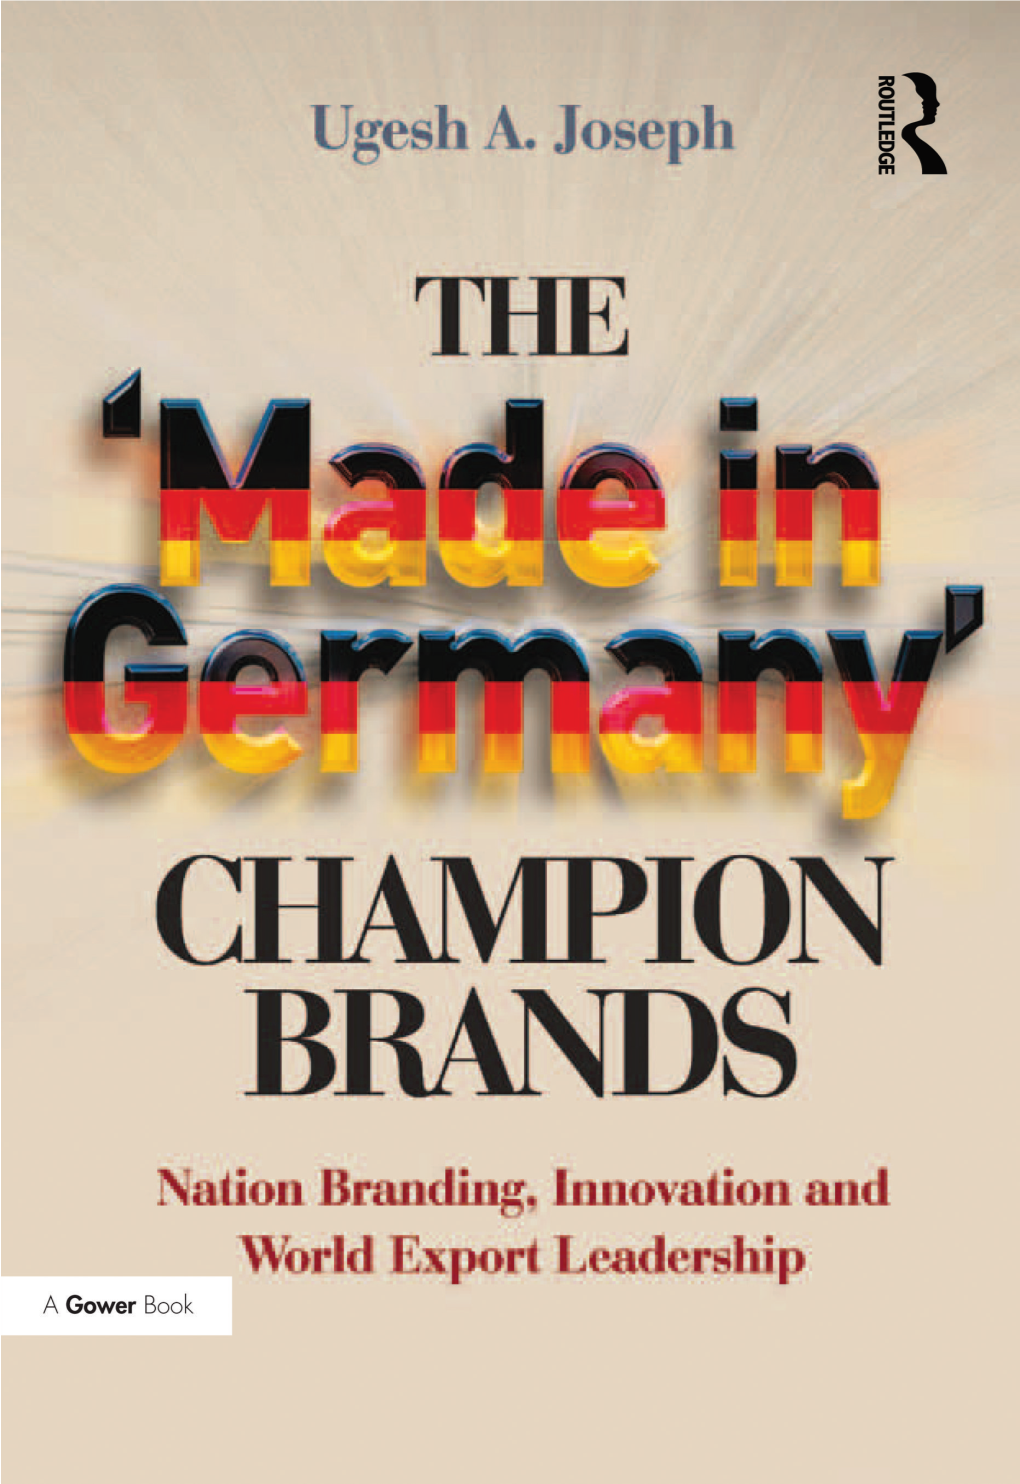 Champion Brands to My Wife, Mercy the ‘Made in Germany’ Champion Brands Nation Branding, Innovation and World Export Leadership